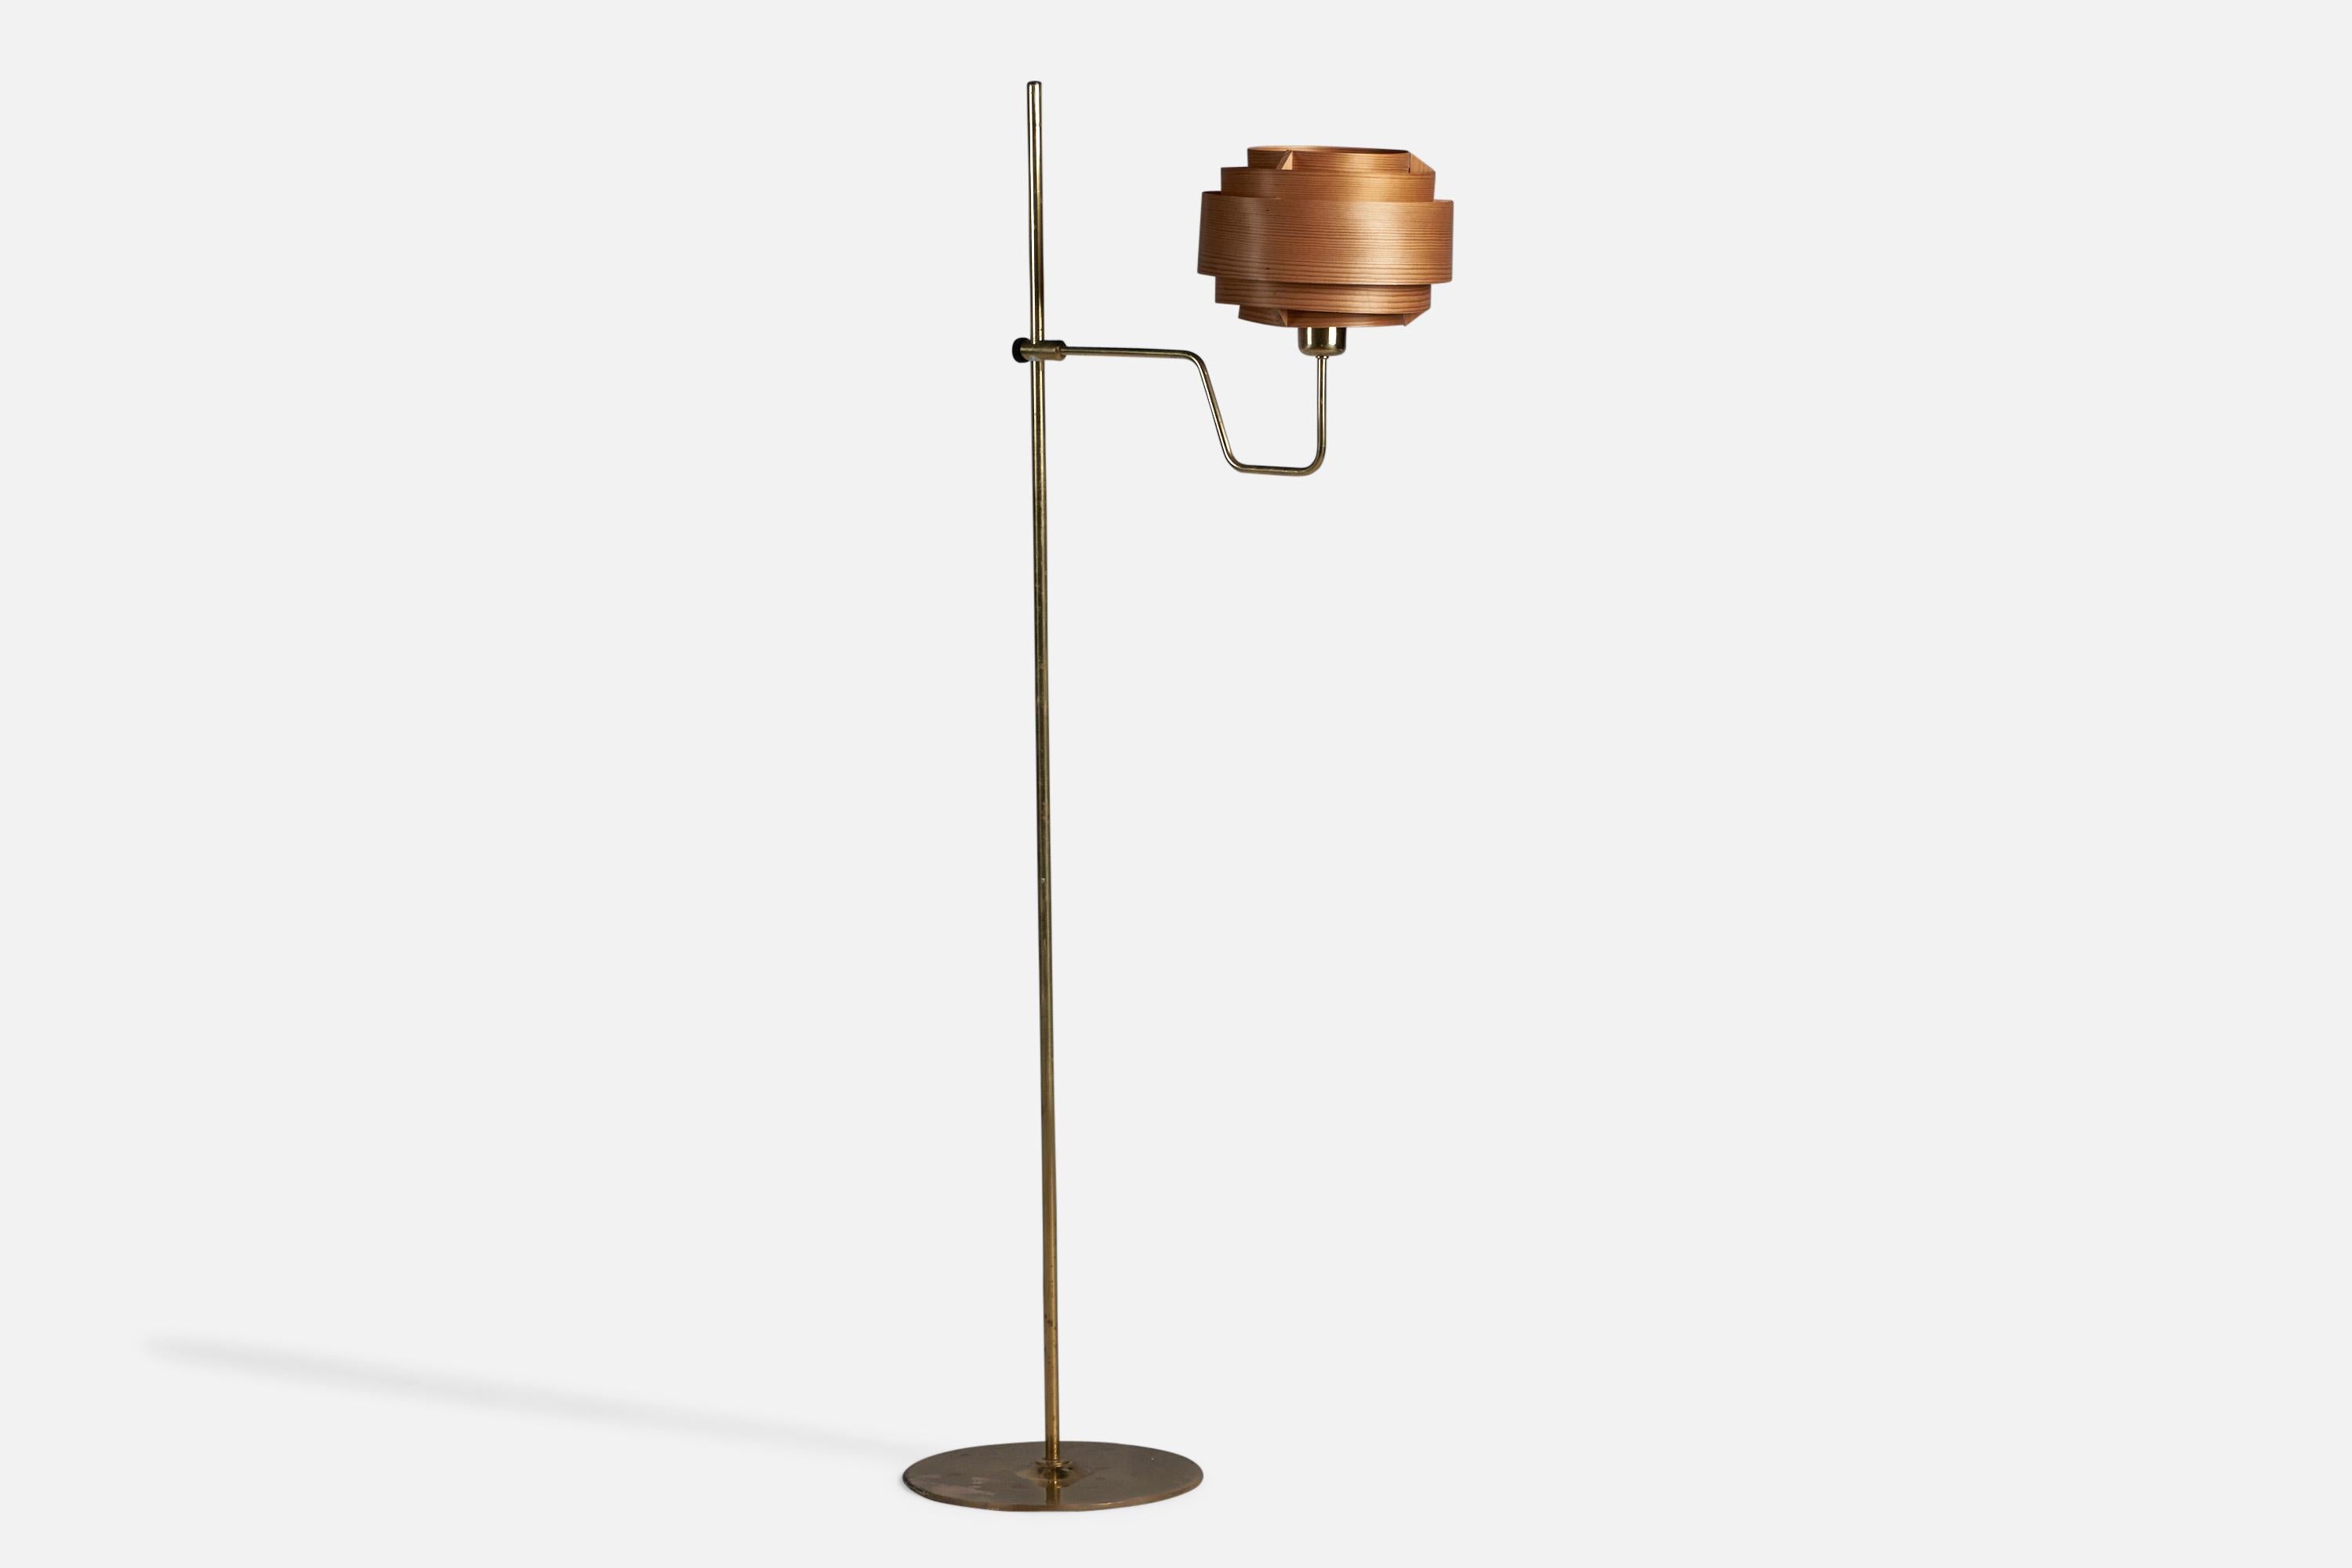 An adjustable brass, pine and moulded pine veneer floor lamp, designed by Hans-Agne Jakobsson, Sweden, 1970s.

Overall Dimensions (inches): 59.75